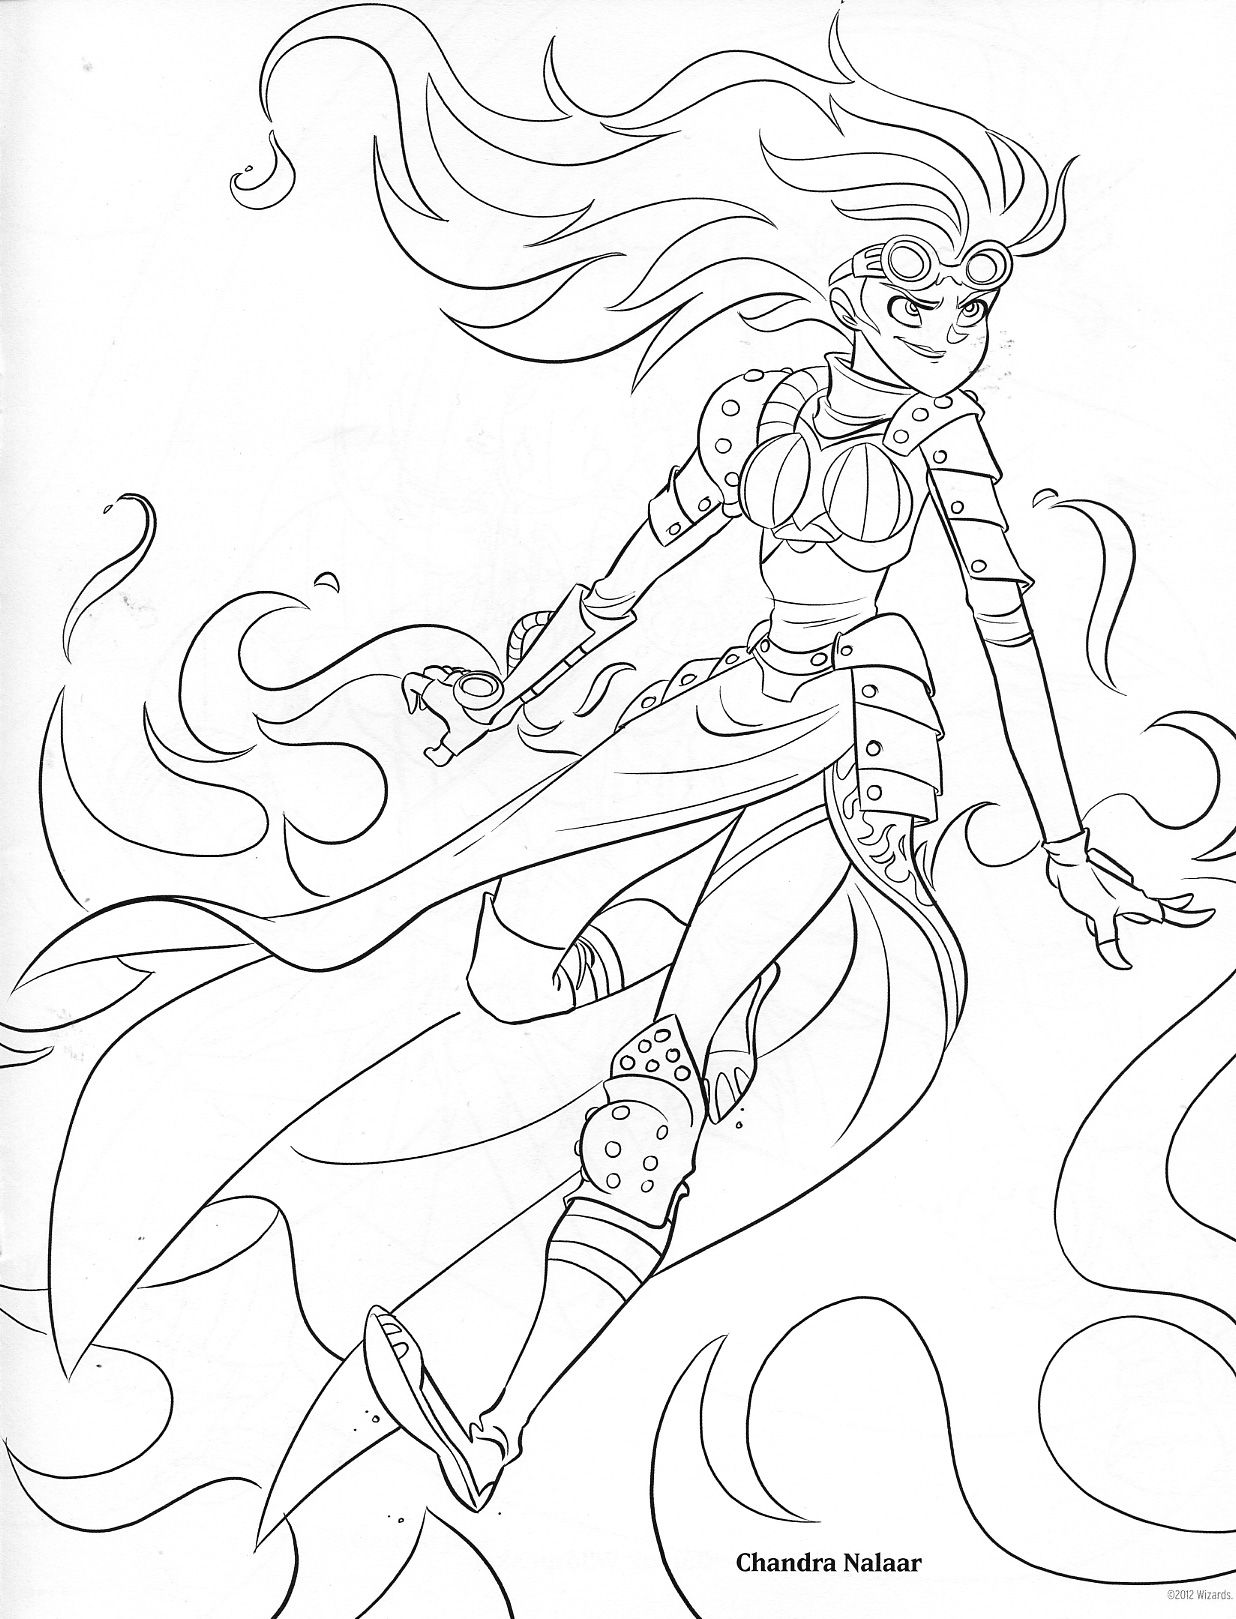 Wizards of the Coast | Coloring books, Coloring pages, Card art